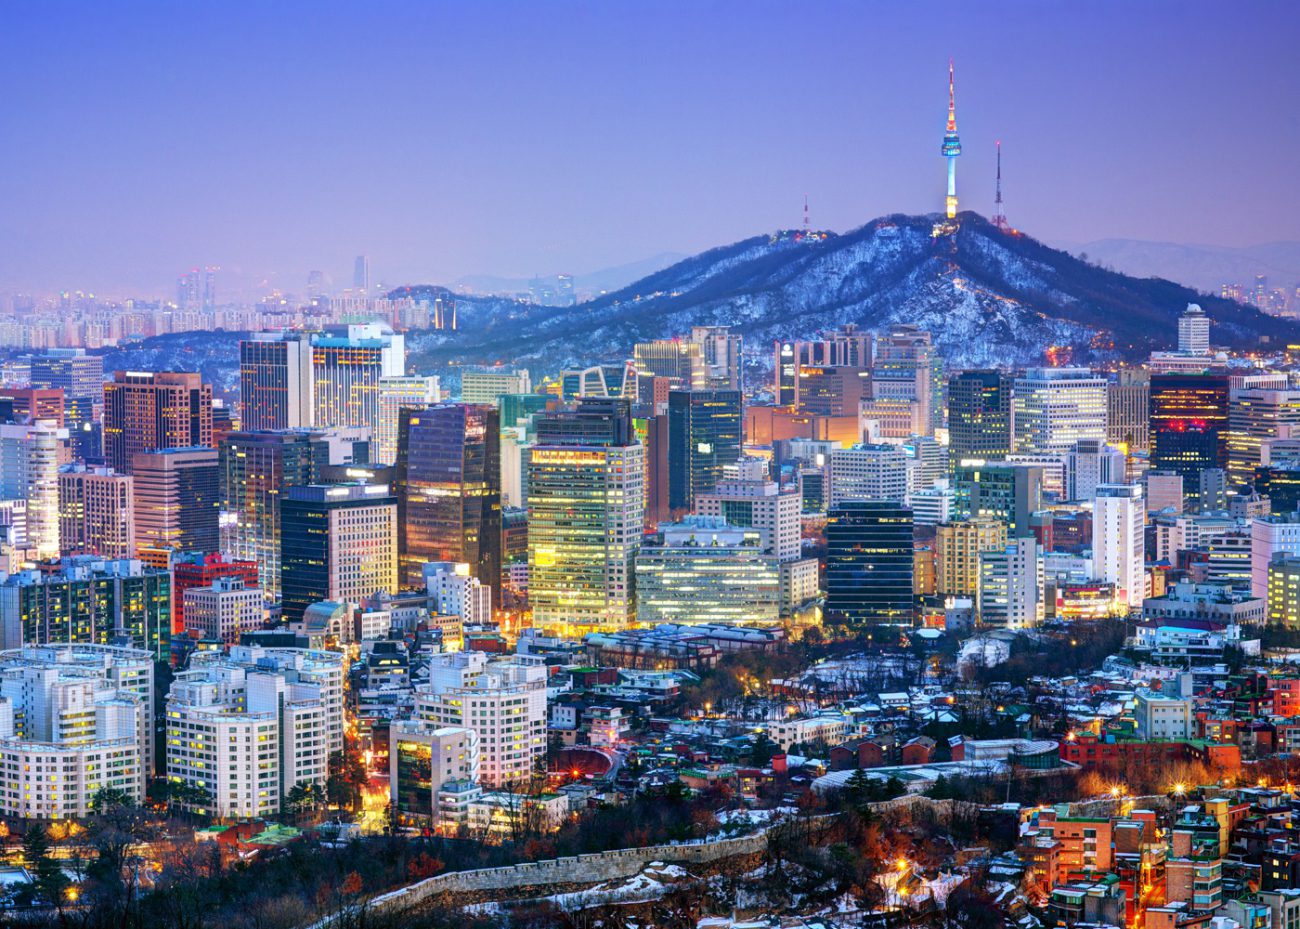 South Korea will not regulate Bitcoin, until it becomes a real currency